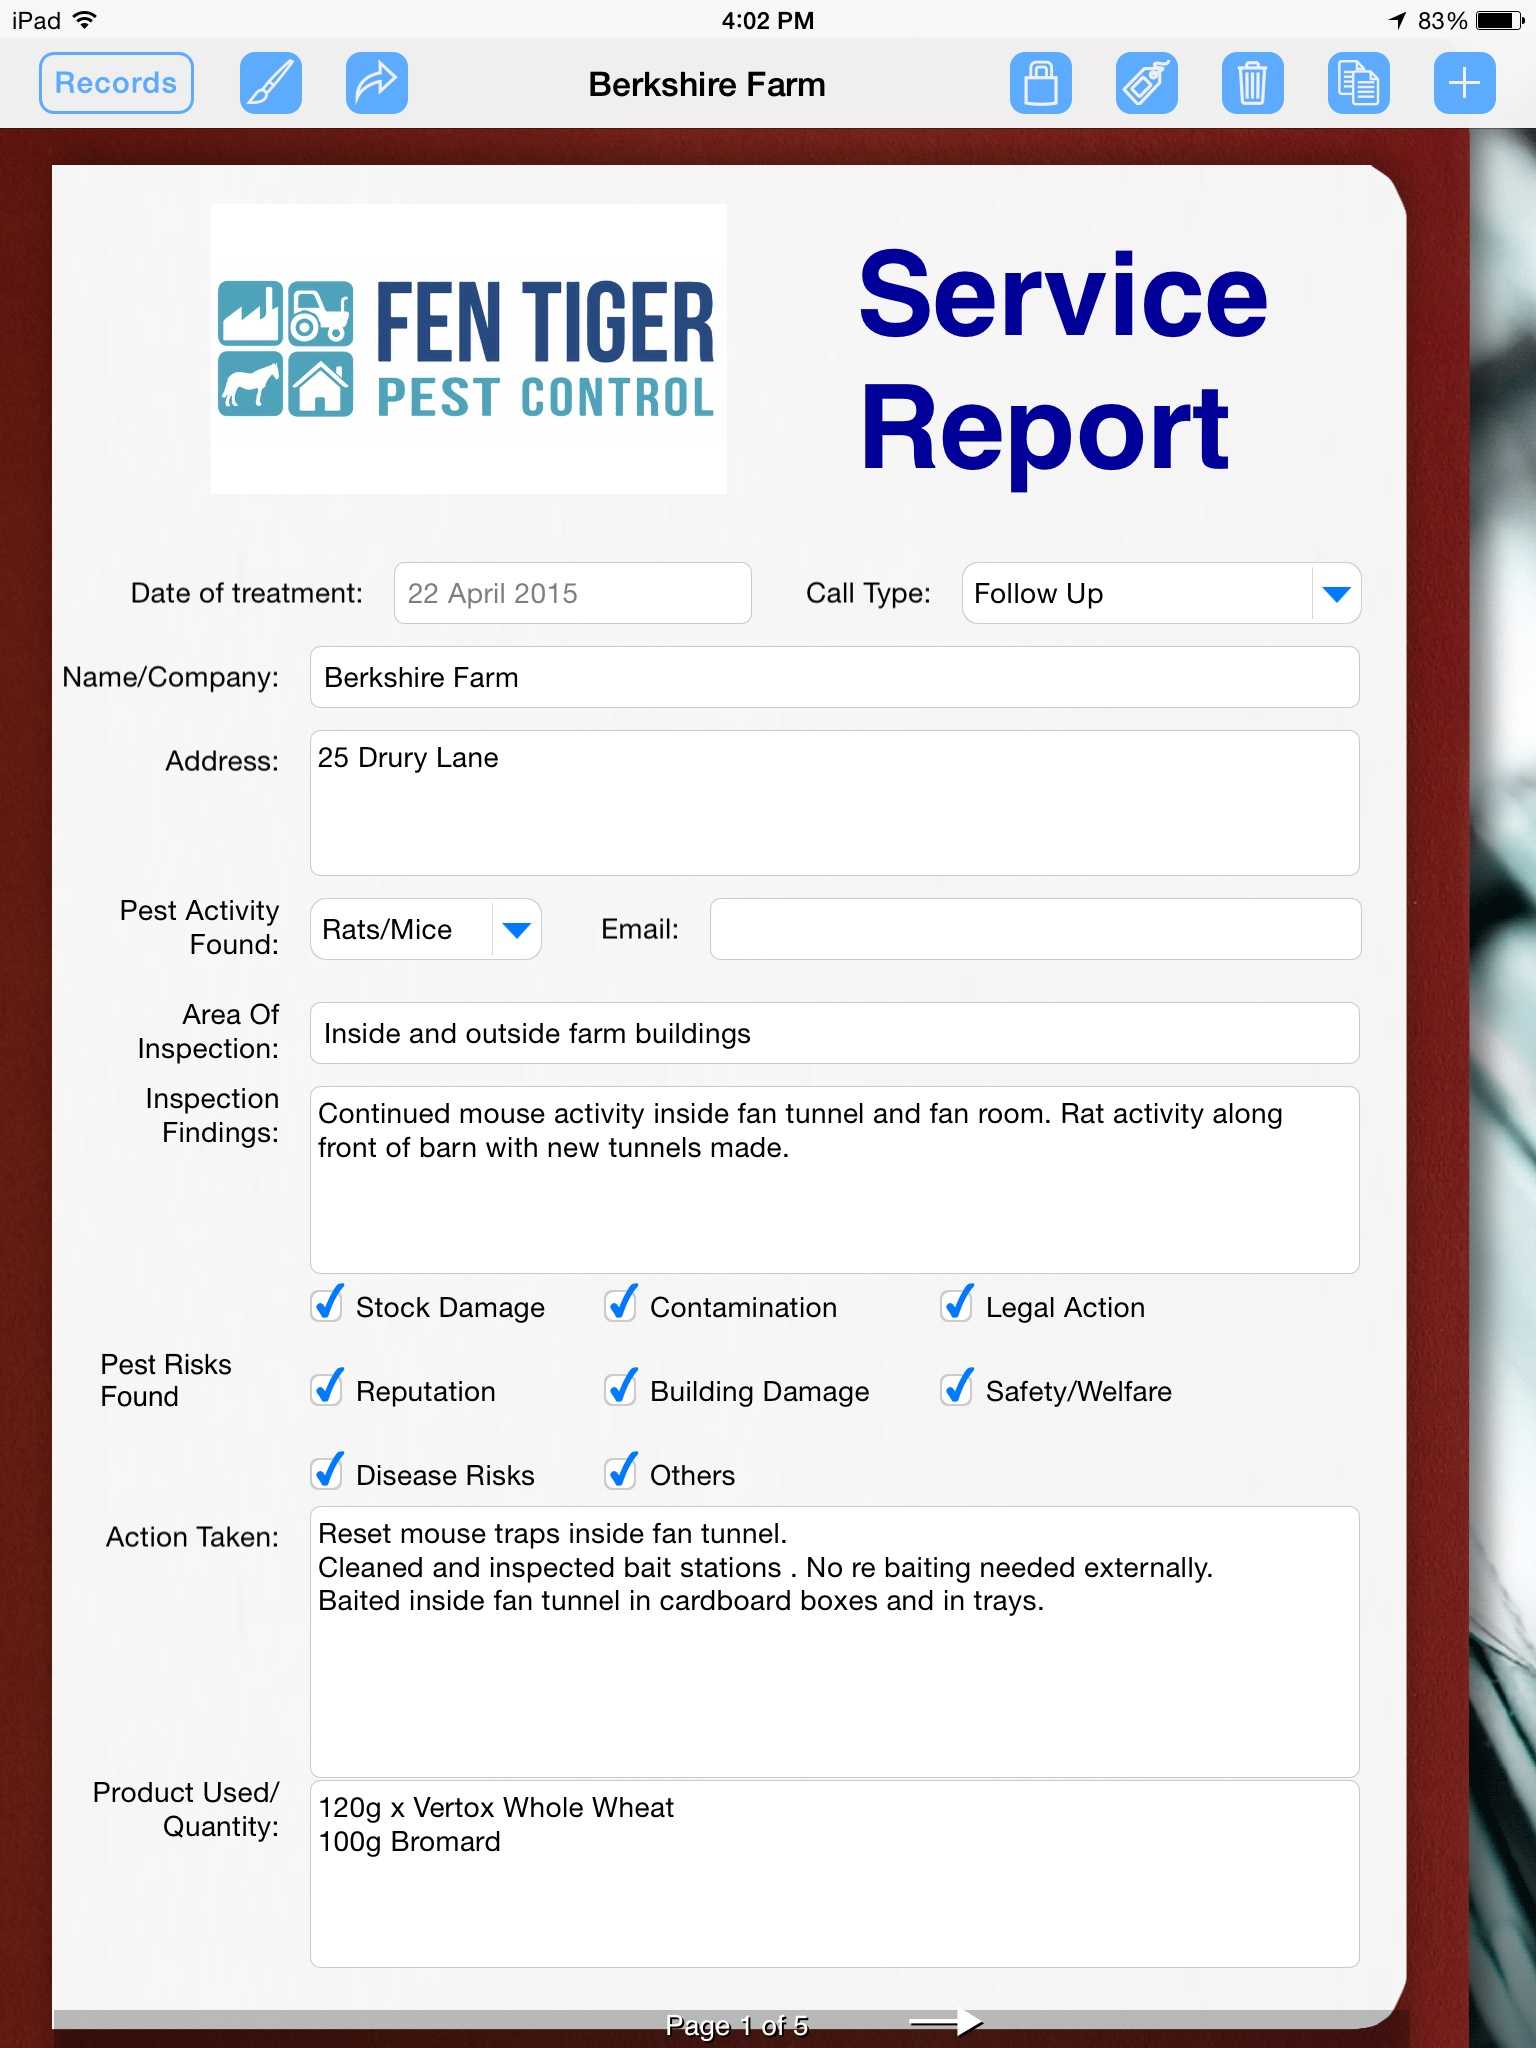 Pest Control Uses Ipad To Prepare Service Report | Form Intended For Pest Control Inspection Report Template